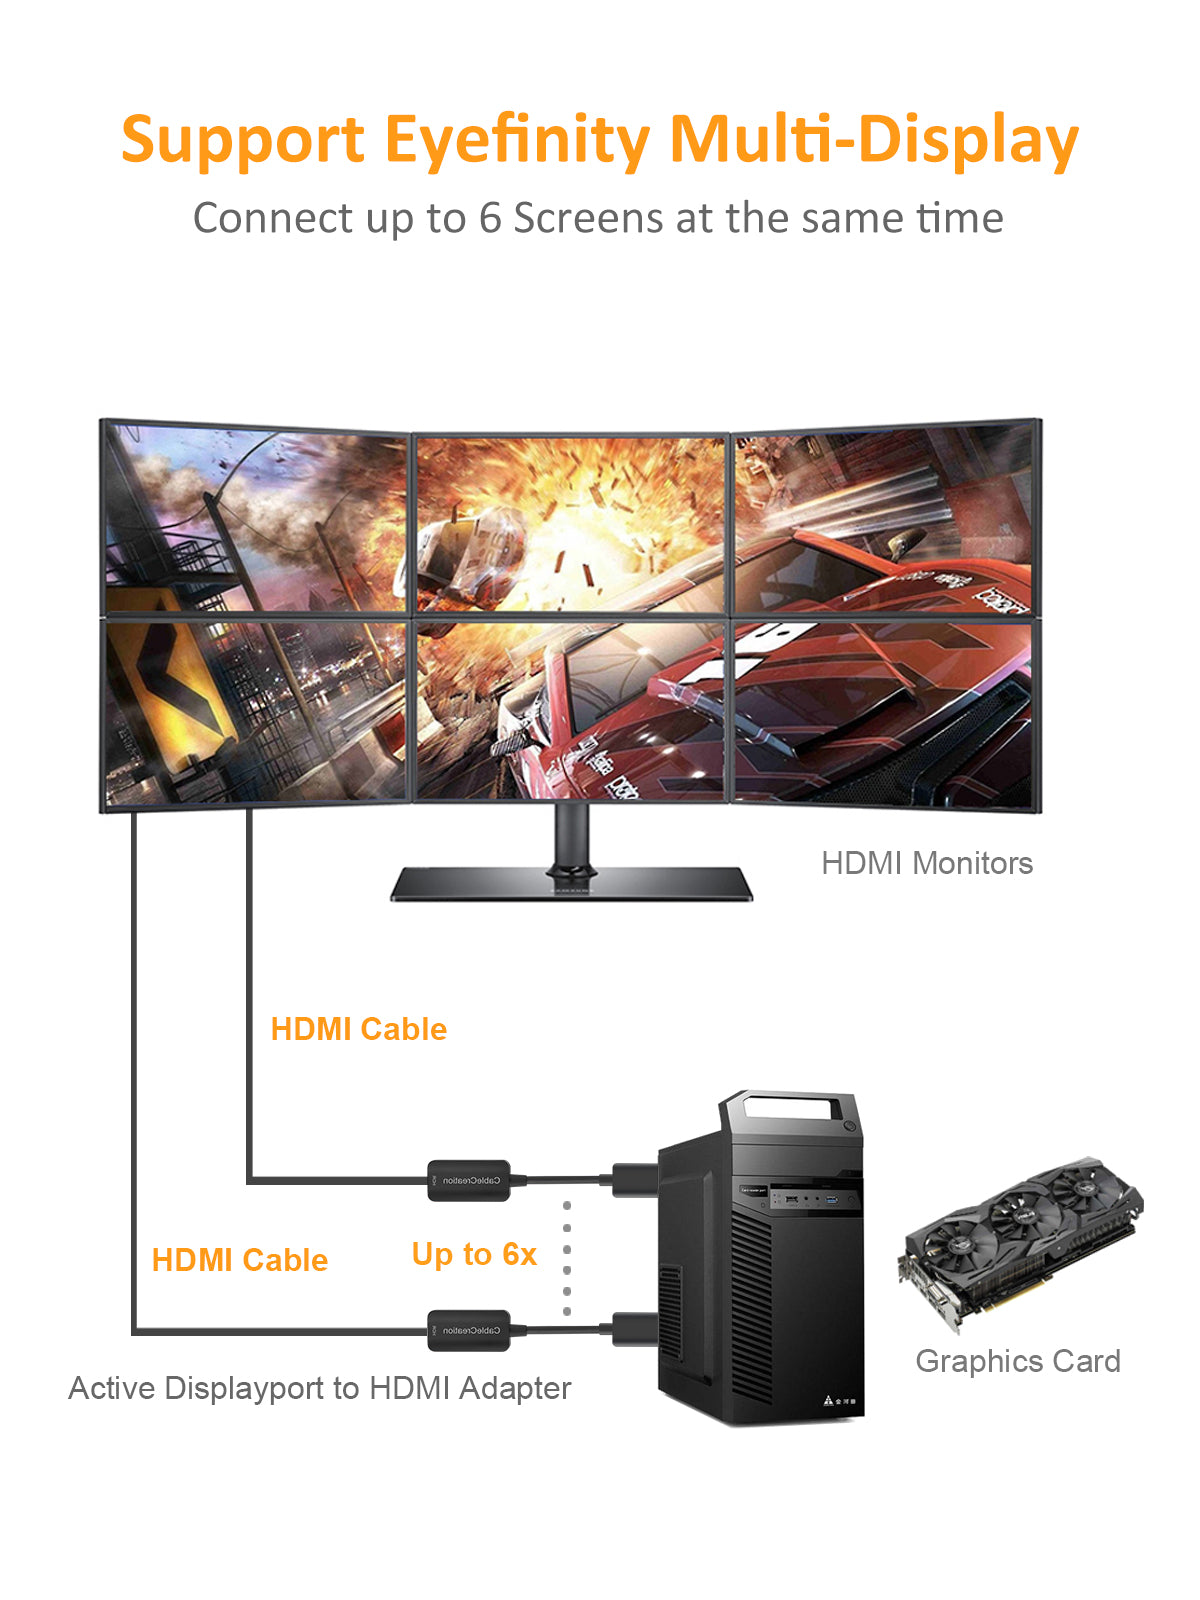 DP to HDMI adapter supports SLS and AMD